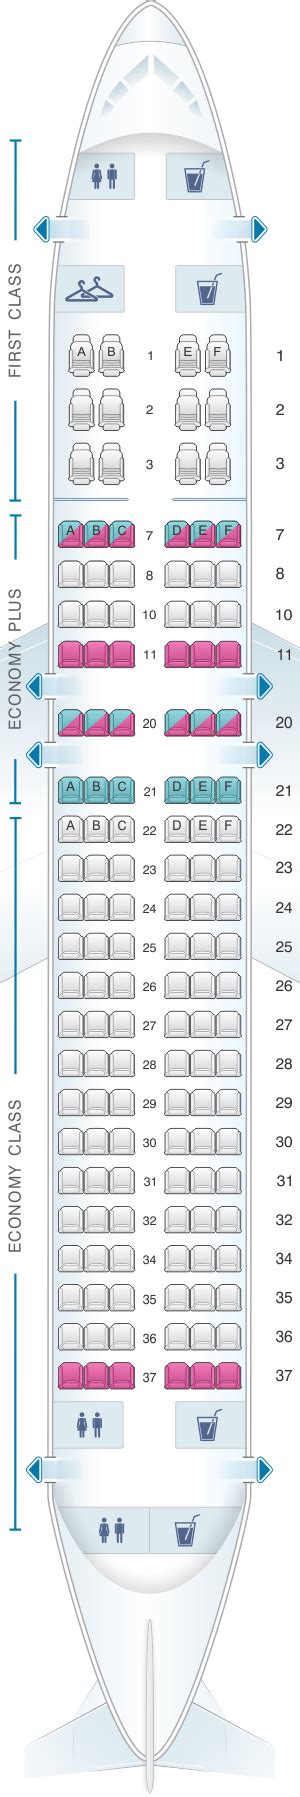 Seat Map United Airlines Airbus A320 Version 1